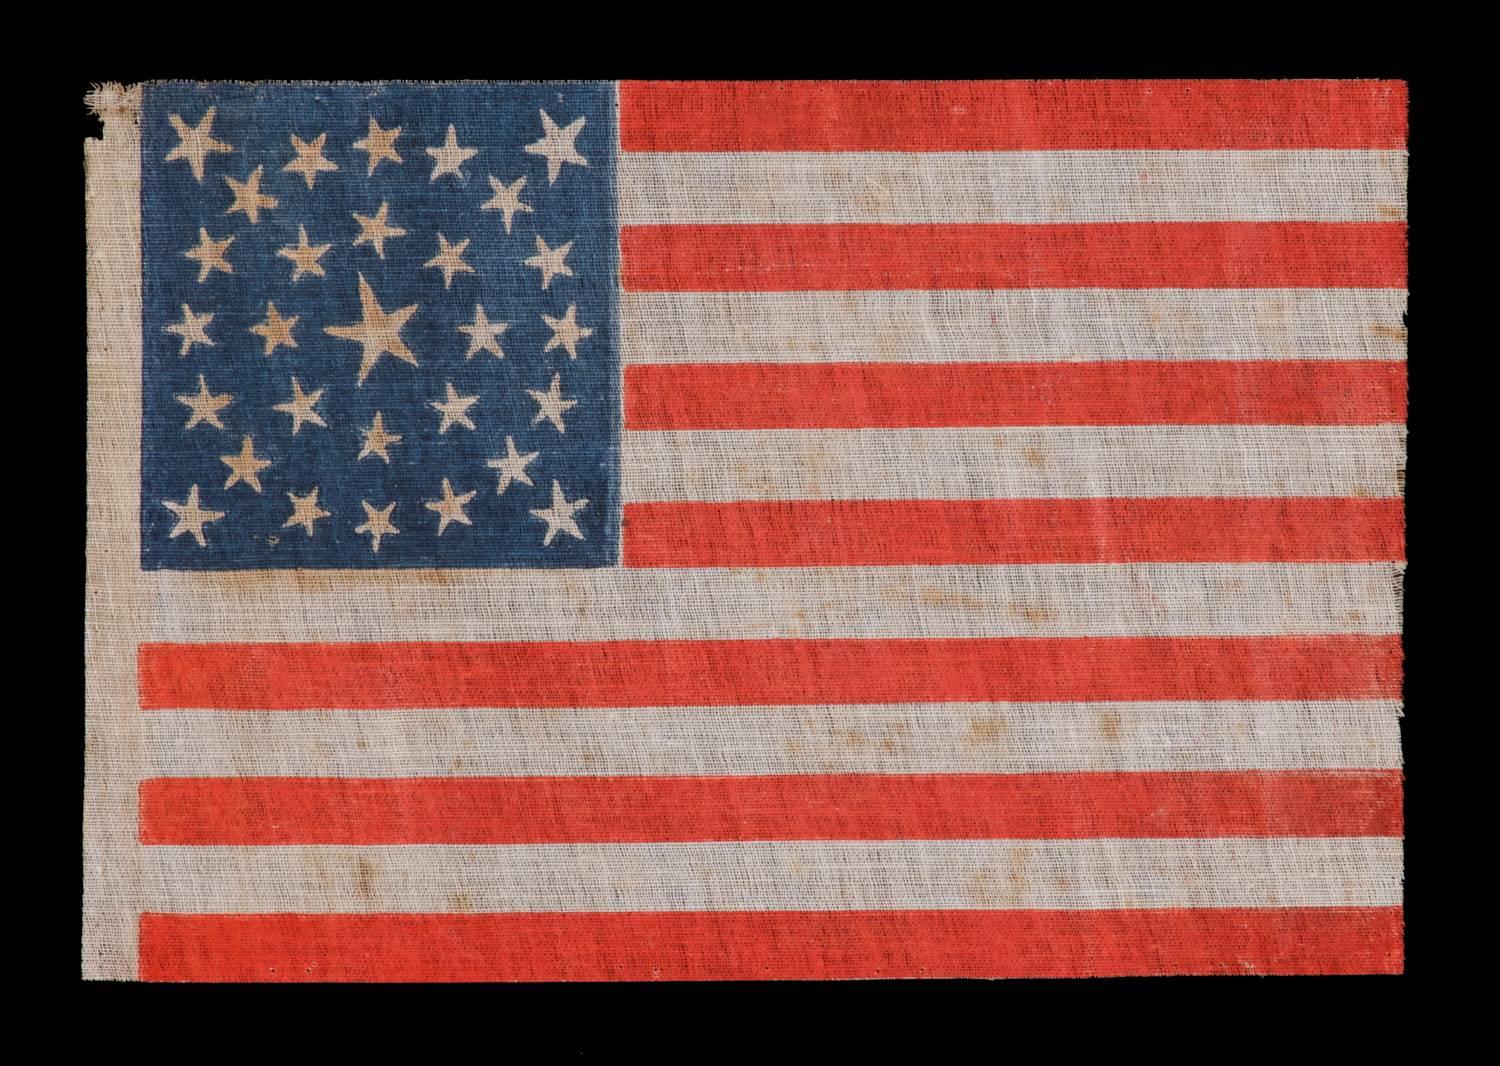 Antique American flag with 29 whimsical stars in a medallion configuration, iowa statehood, pre-civil war, 1846-1848:

29 star American national parade flag, printed on coarse, glazed cotton. The stars are arranged in a double wreath pattern with